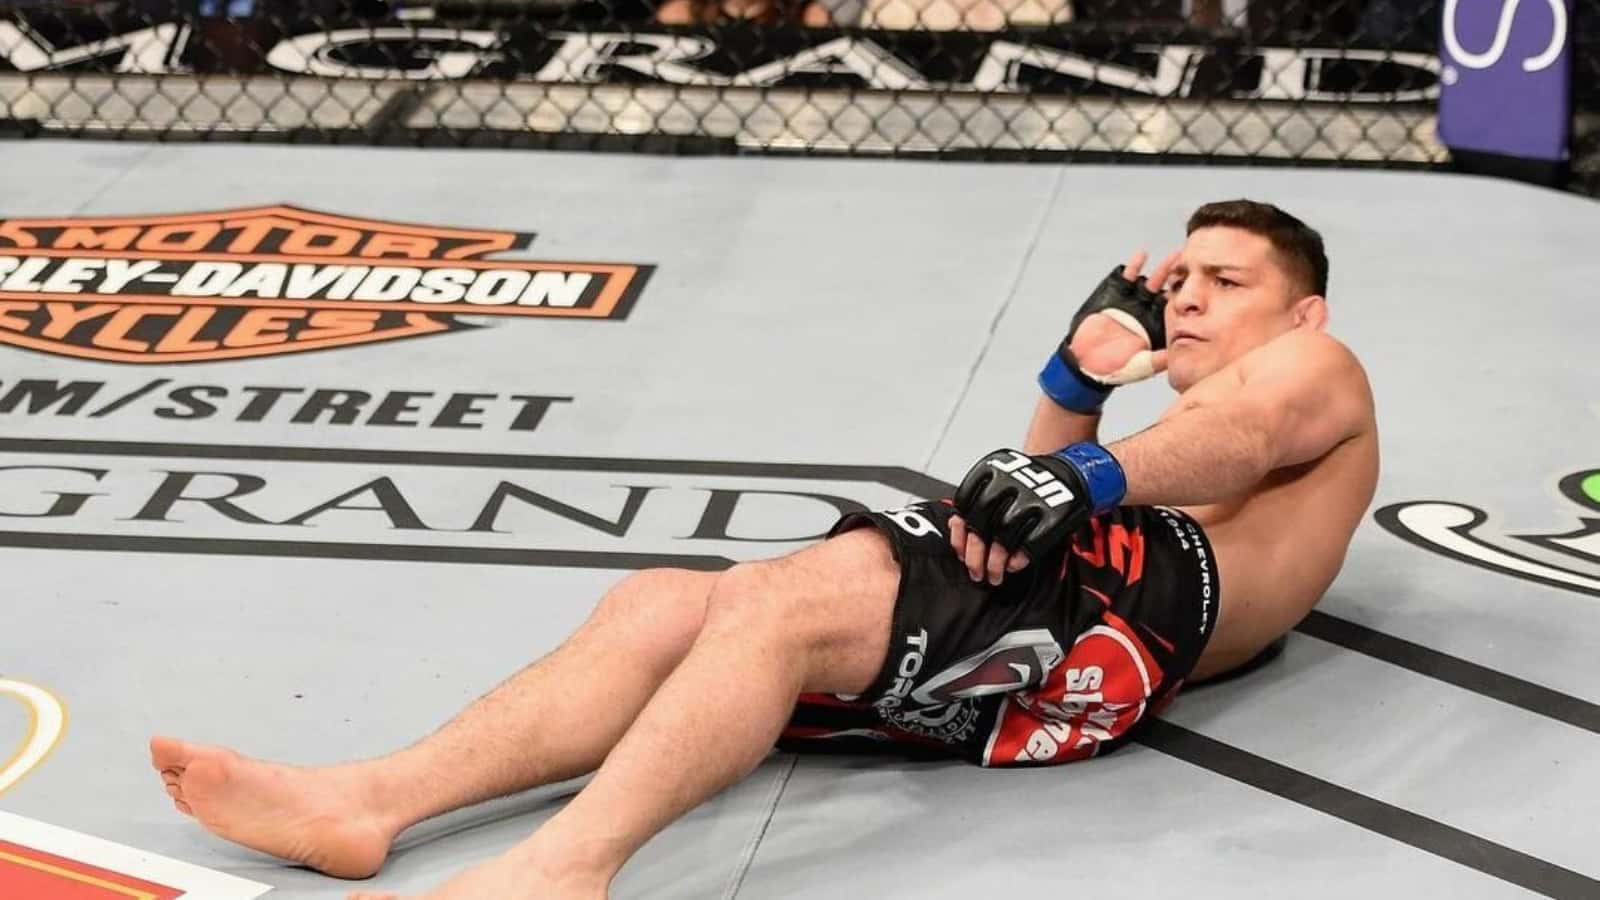 Mixed Martial Artist Nick Diaz Taunting His Enemy Wallpaper